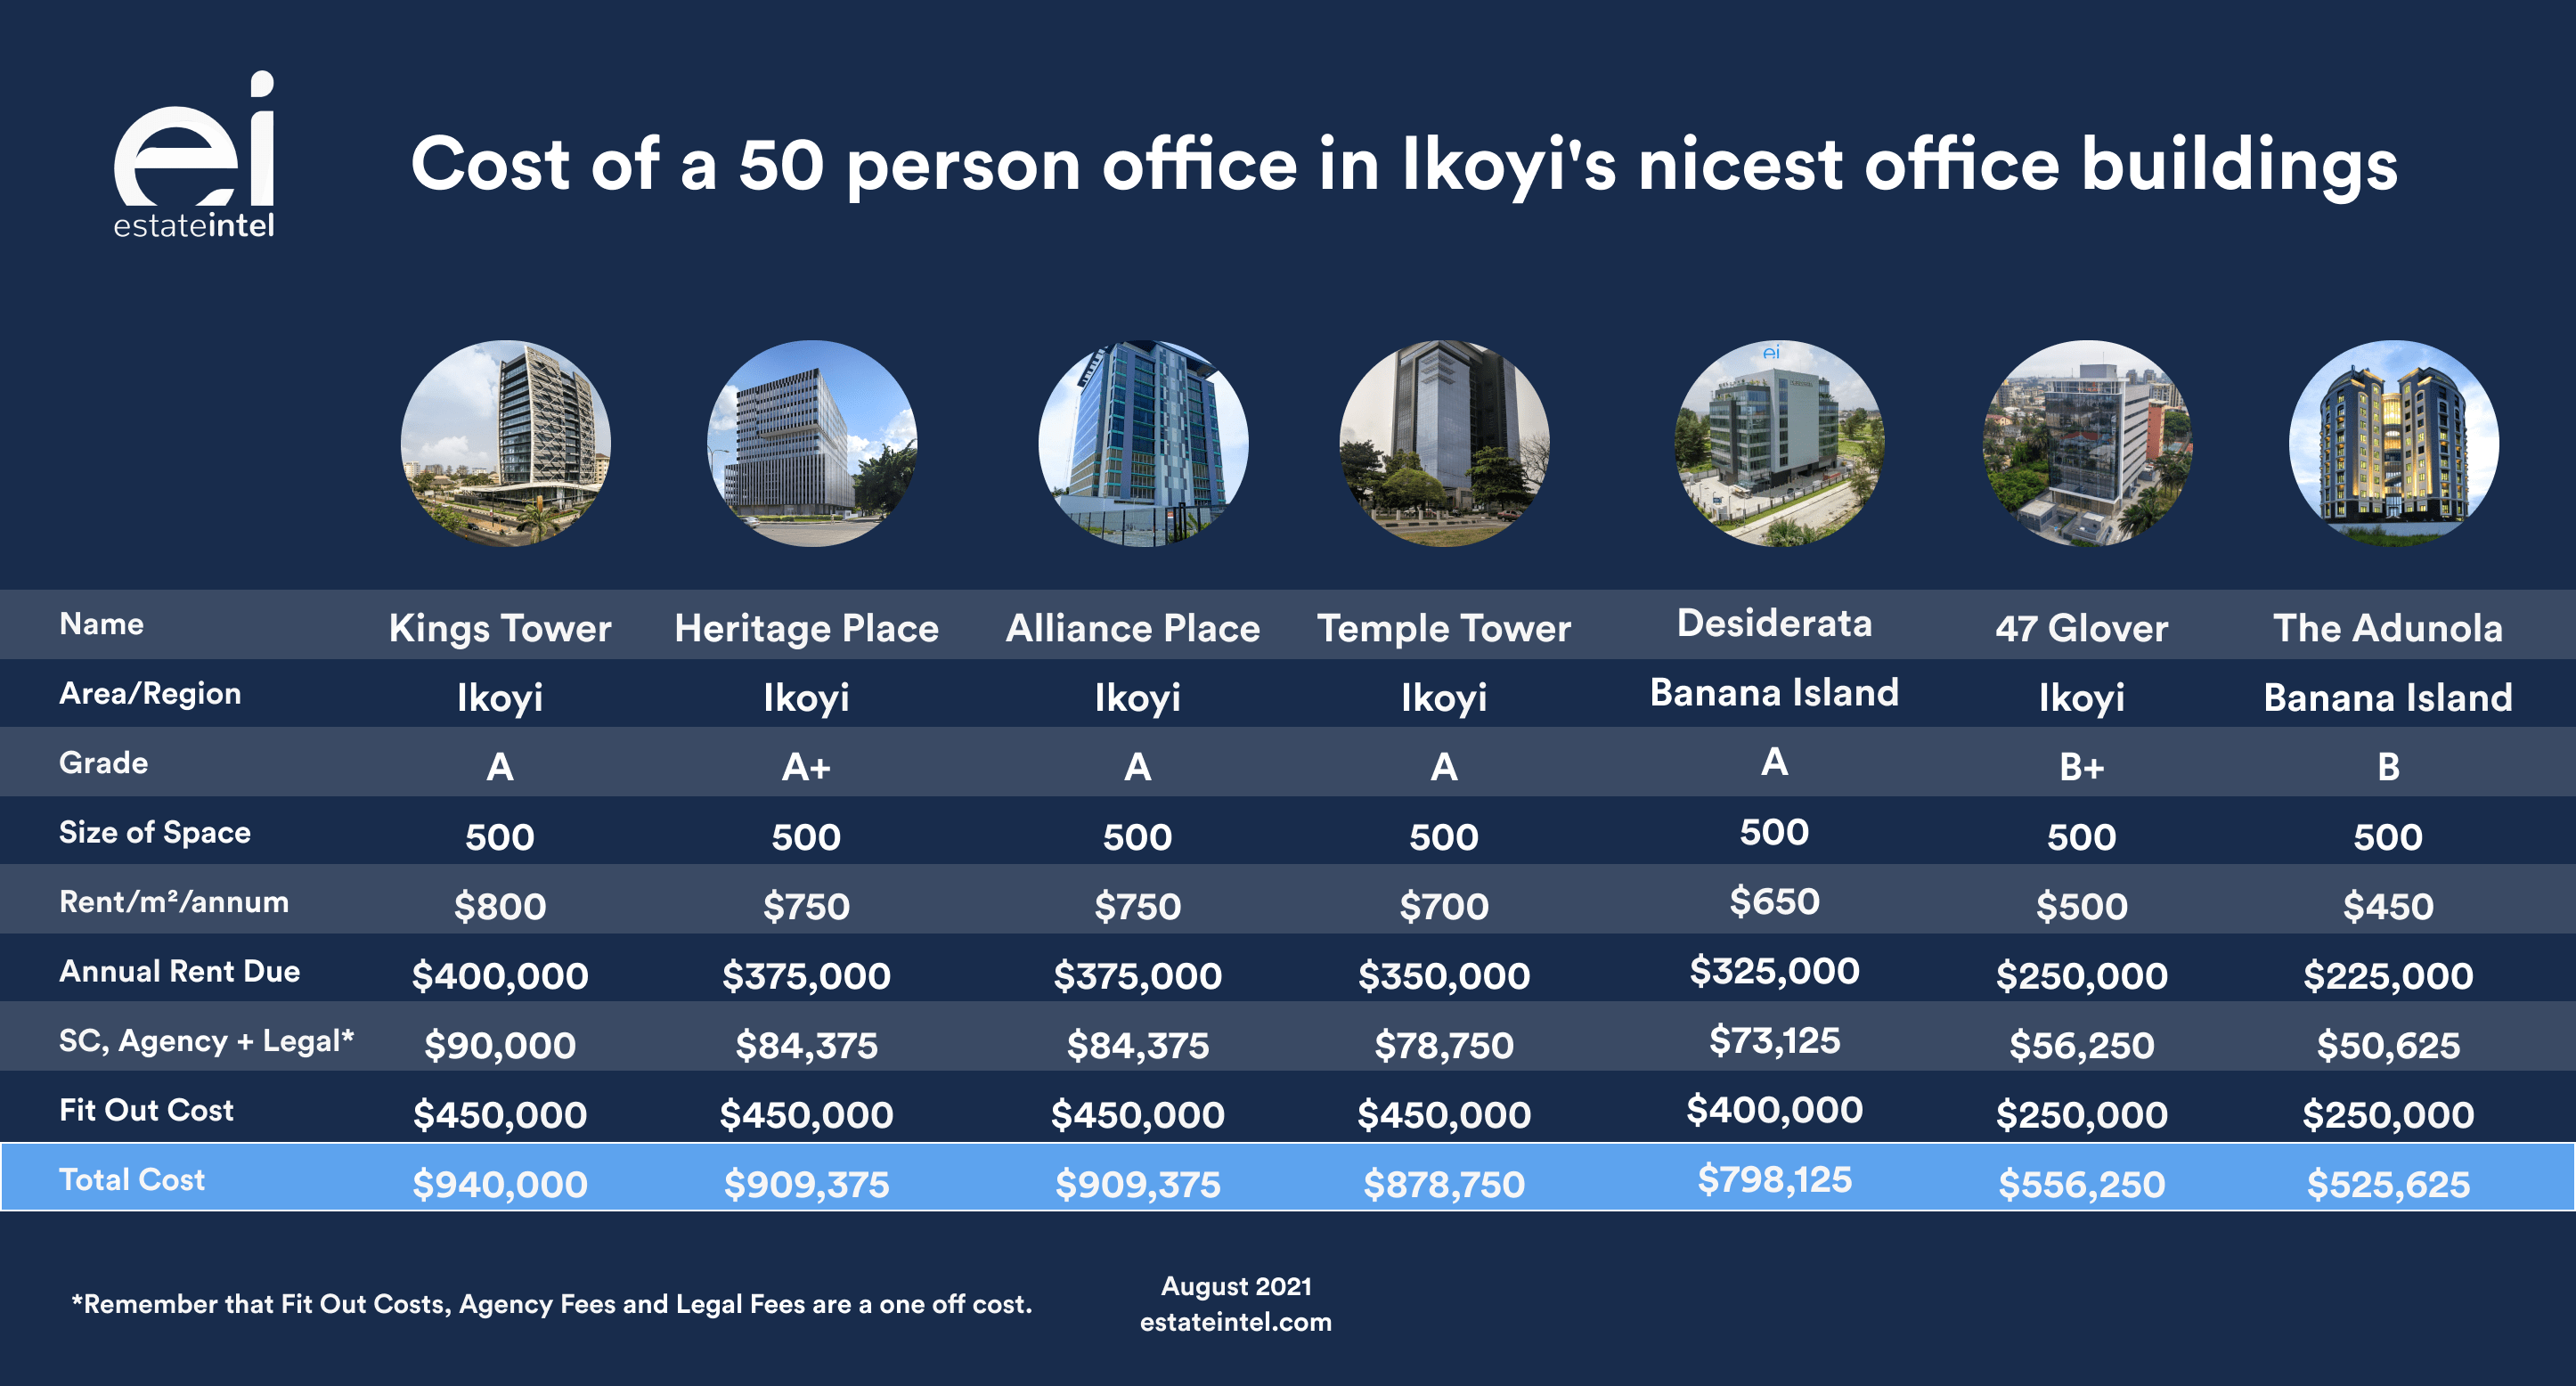 How much will a 50 person office cost in Ikoyi's nicest office buildings?